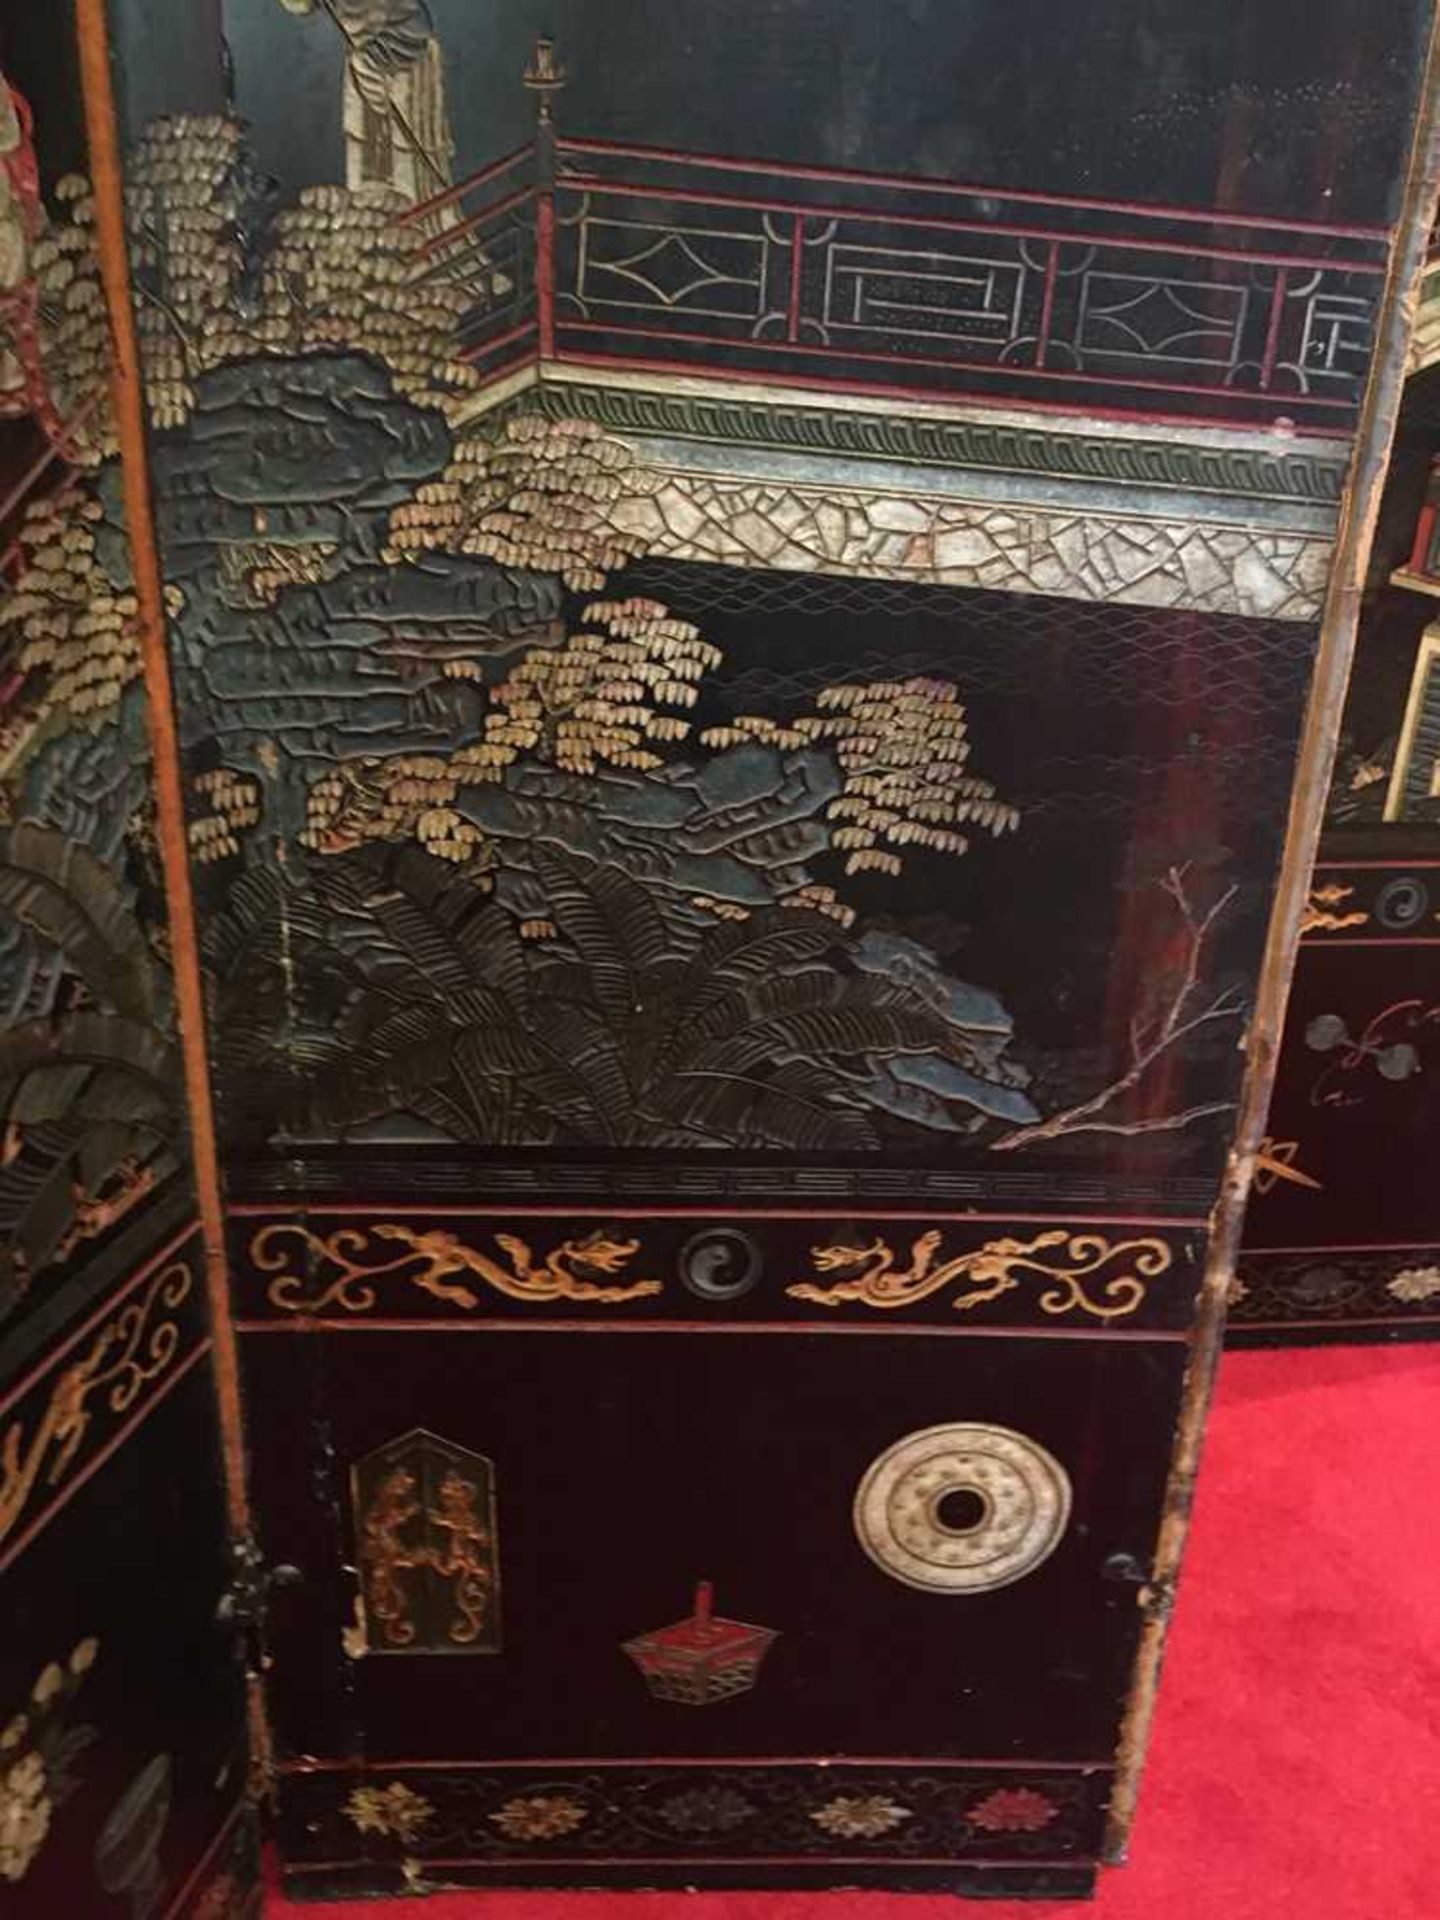 A CHINESE COROMANDEL BLACK LACQUER TWELVE-PANEL SCREEN QING DYNASTY, 18TH CENTURY - Image 28 of 72